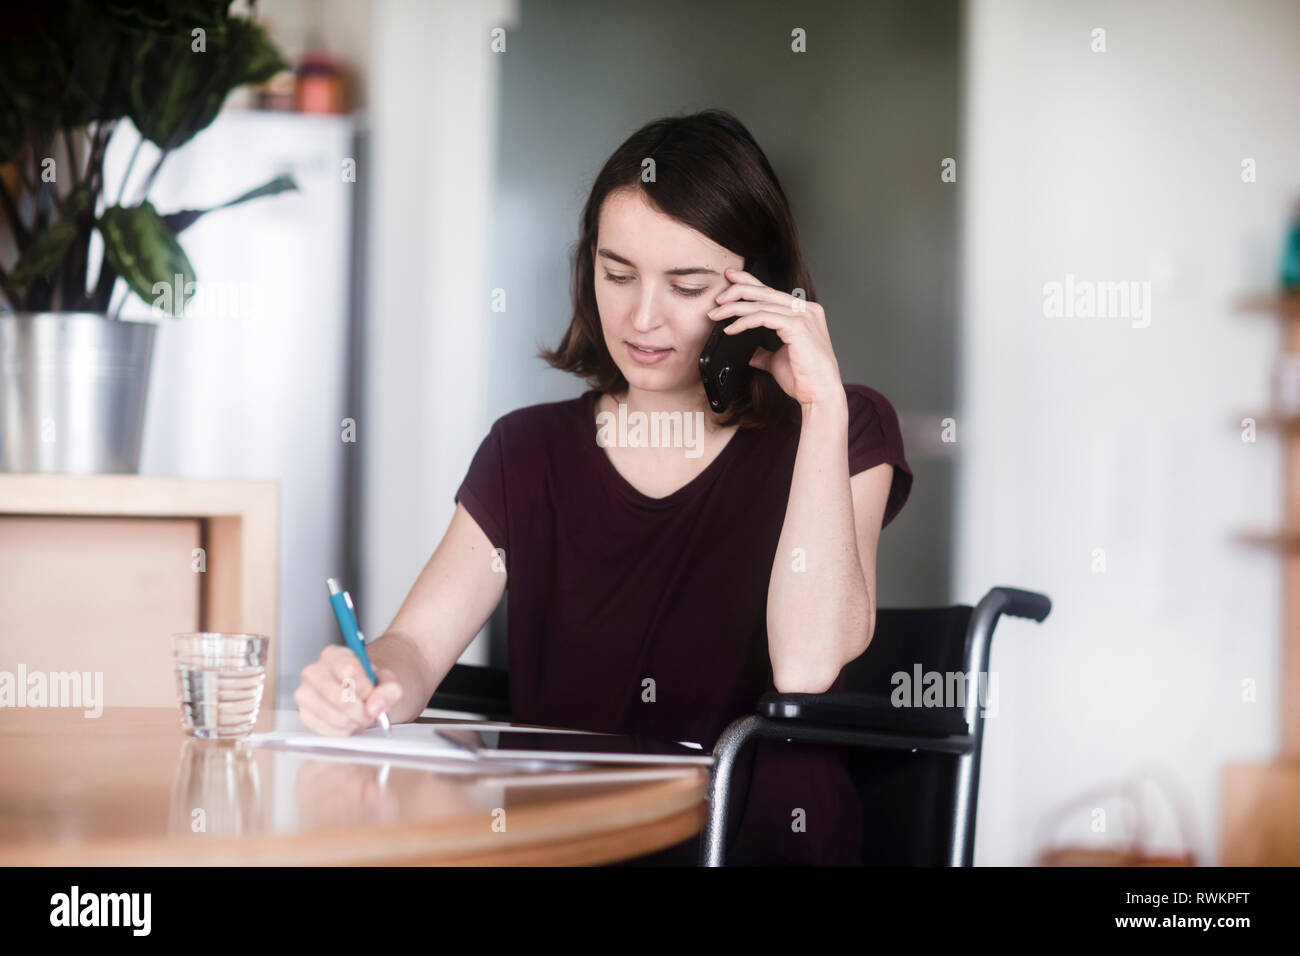 Woman in wheelchair using cellphone and taking notes Stock Photo